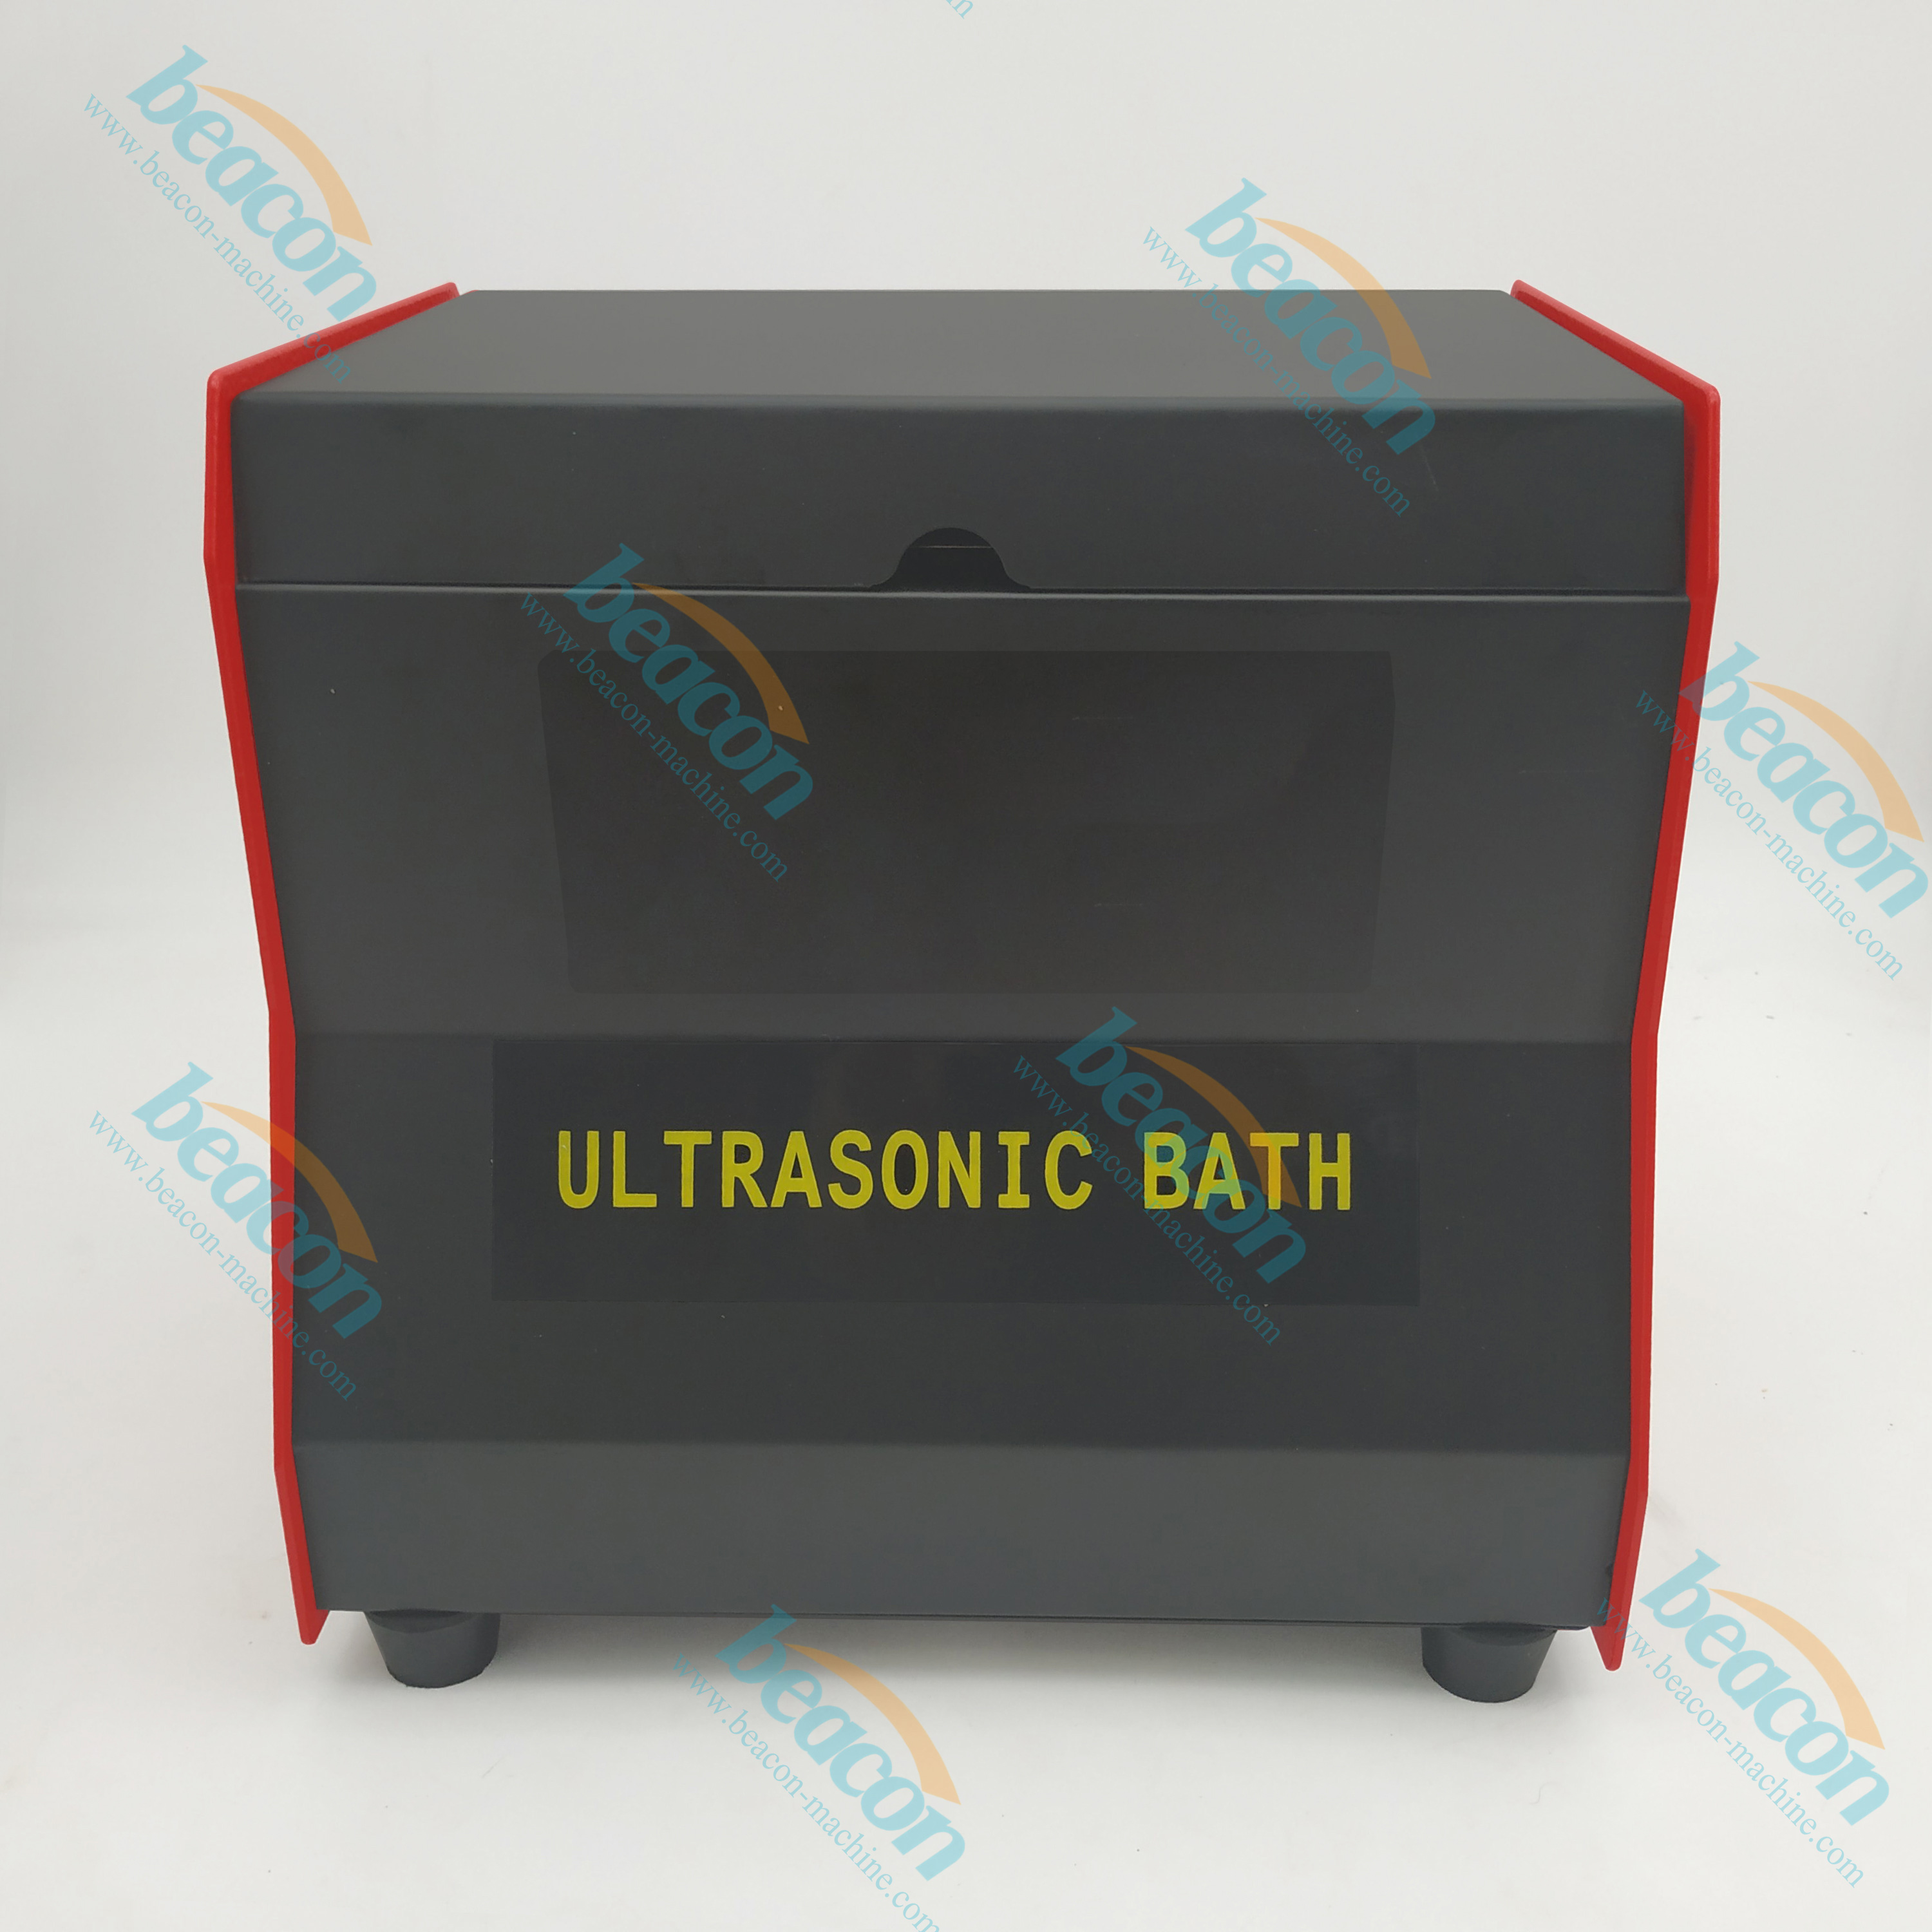 BC-6C Car Fuel Injector Cleaning and Tester Machine Ultrasonic Cleaner Gasoline Fuel Injector 6-Cylinders